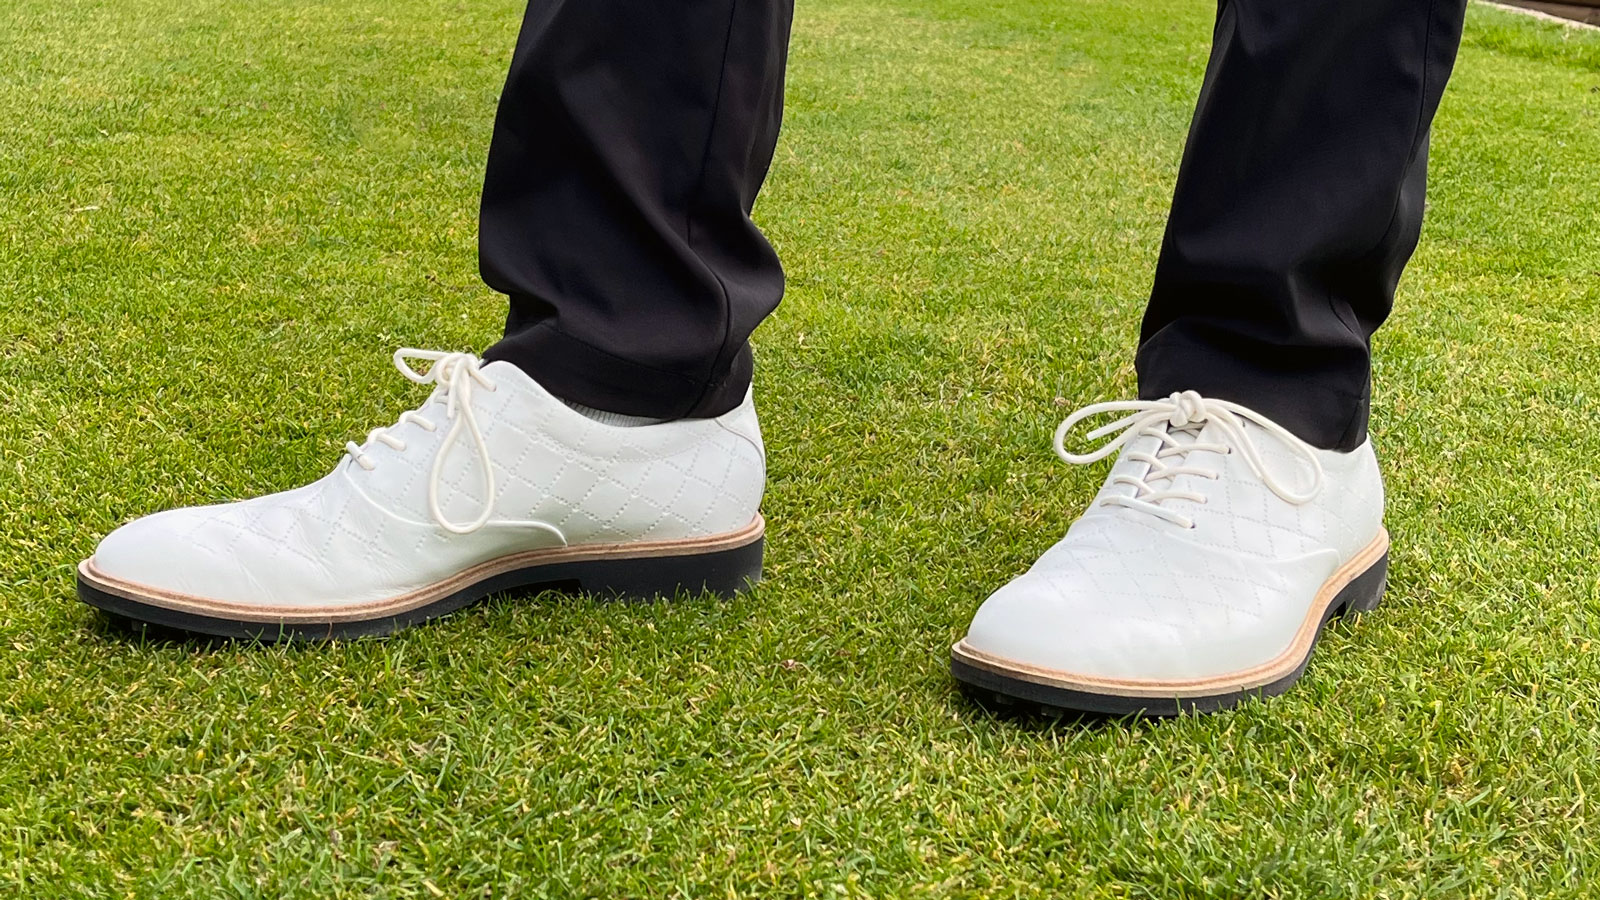 First Look: ECCO Classic Hybrid Spikeless Golf Shoes